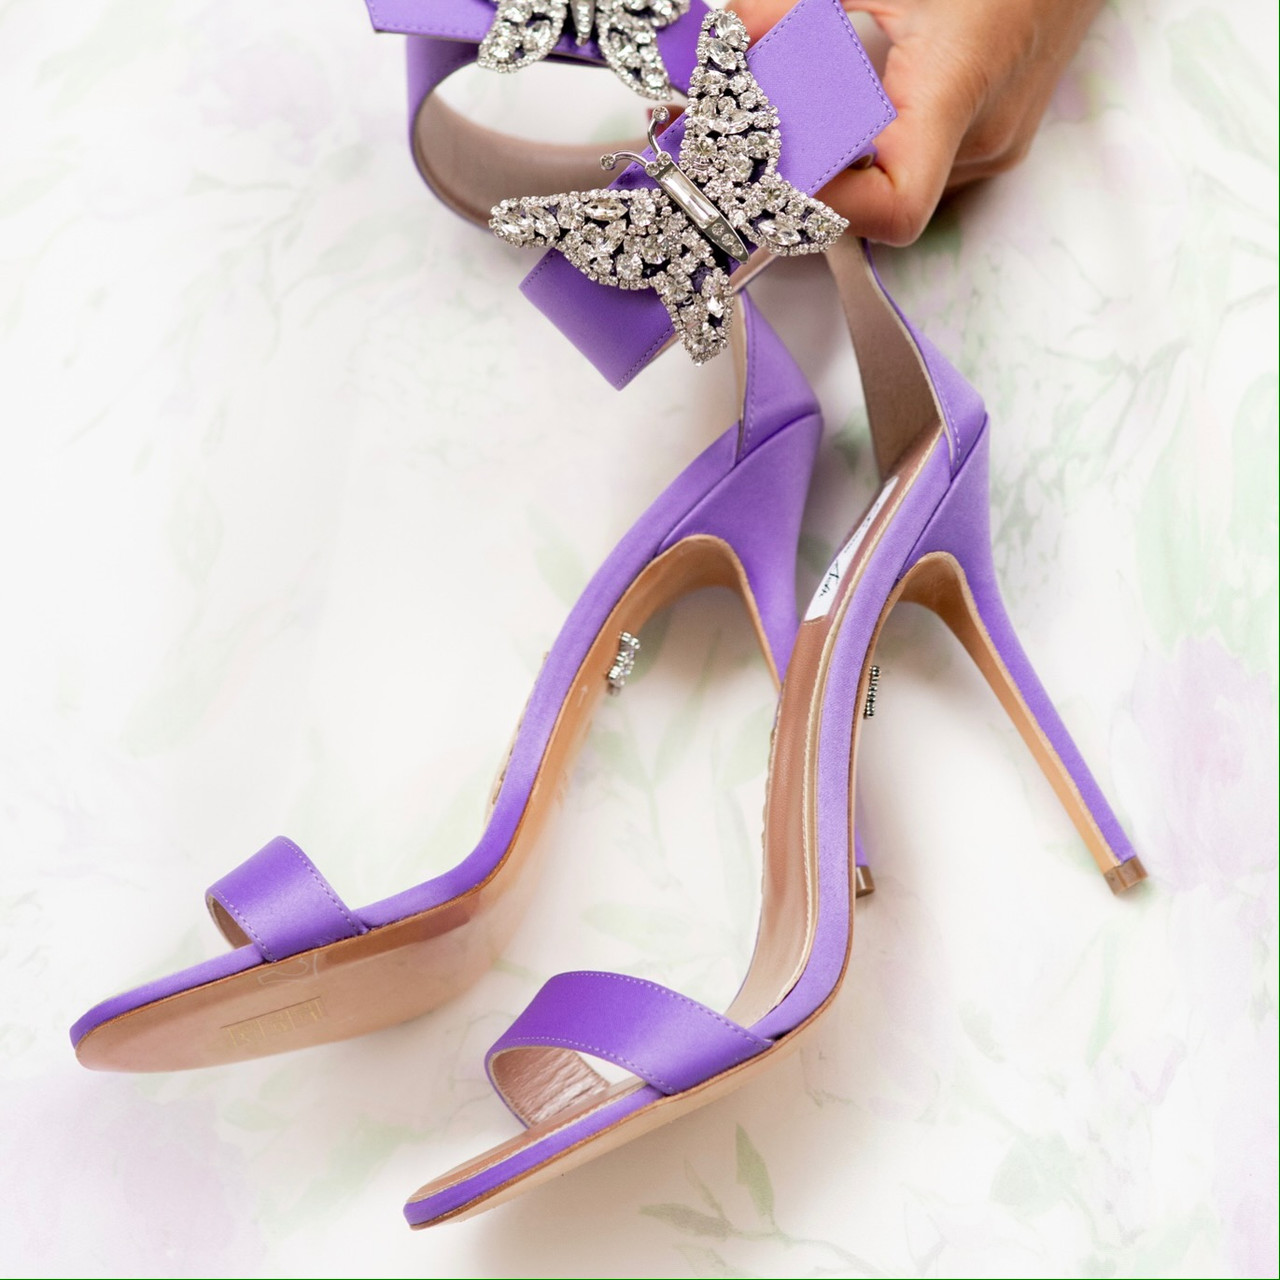 Purple Flower Rhinestone Bridal Shoes High Heels Stiletto Lace Wedding Shoes  New Designer Party Pumps Formal Dress Shoes From Nancy1984, $57.09 |  DHgate.Com